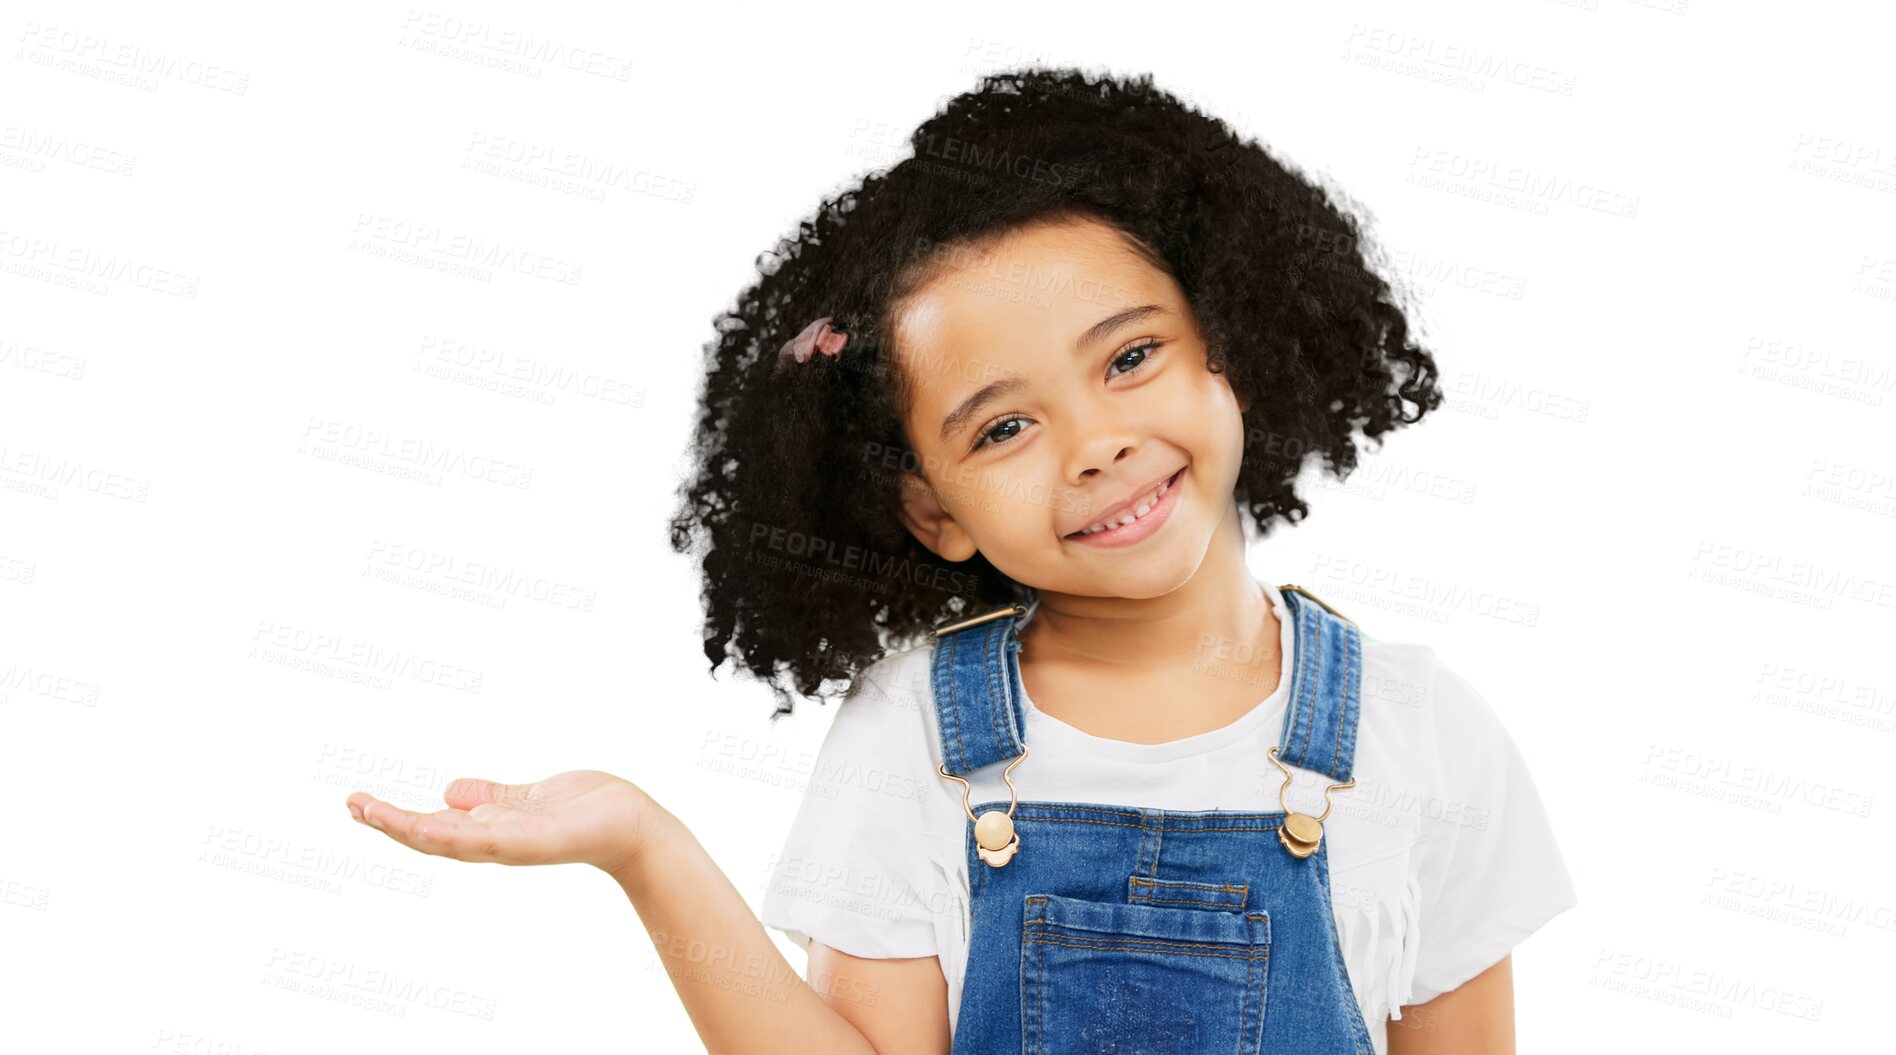 Buy stock photo Palm, offer and presentation with portrait of child on png and smile, show and promotion. Happy, advertising and announcement with face of young girl isolated on transparent background for hand sign